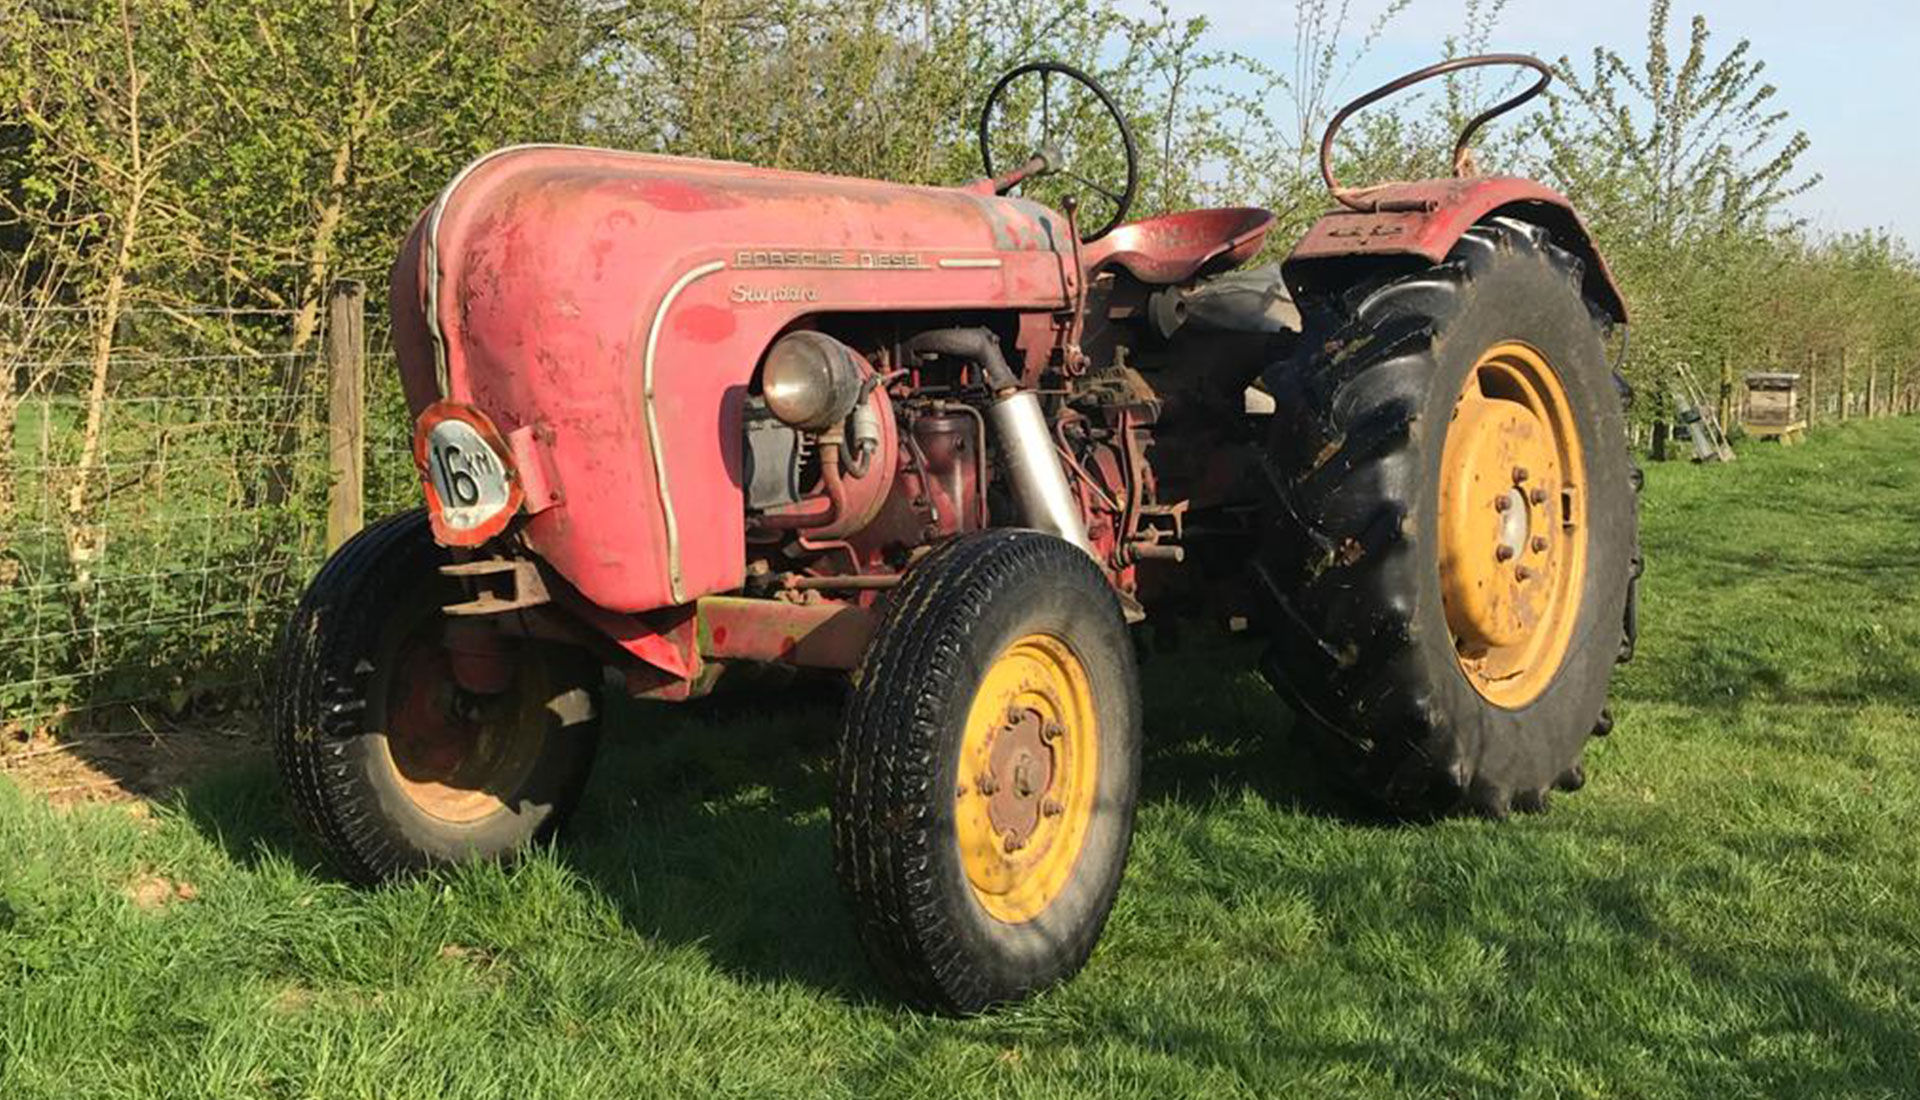 NEWS&EVENTS ORCHARD Our Amazing 1964 Porsche Tractor